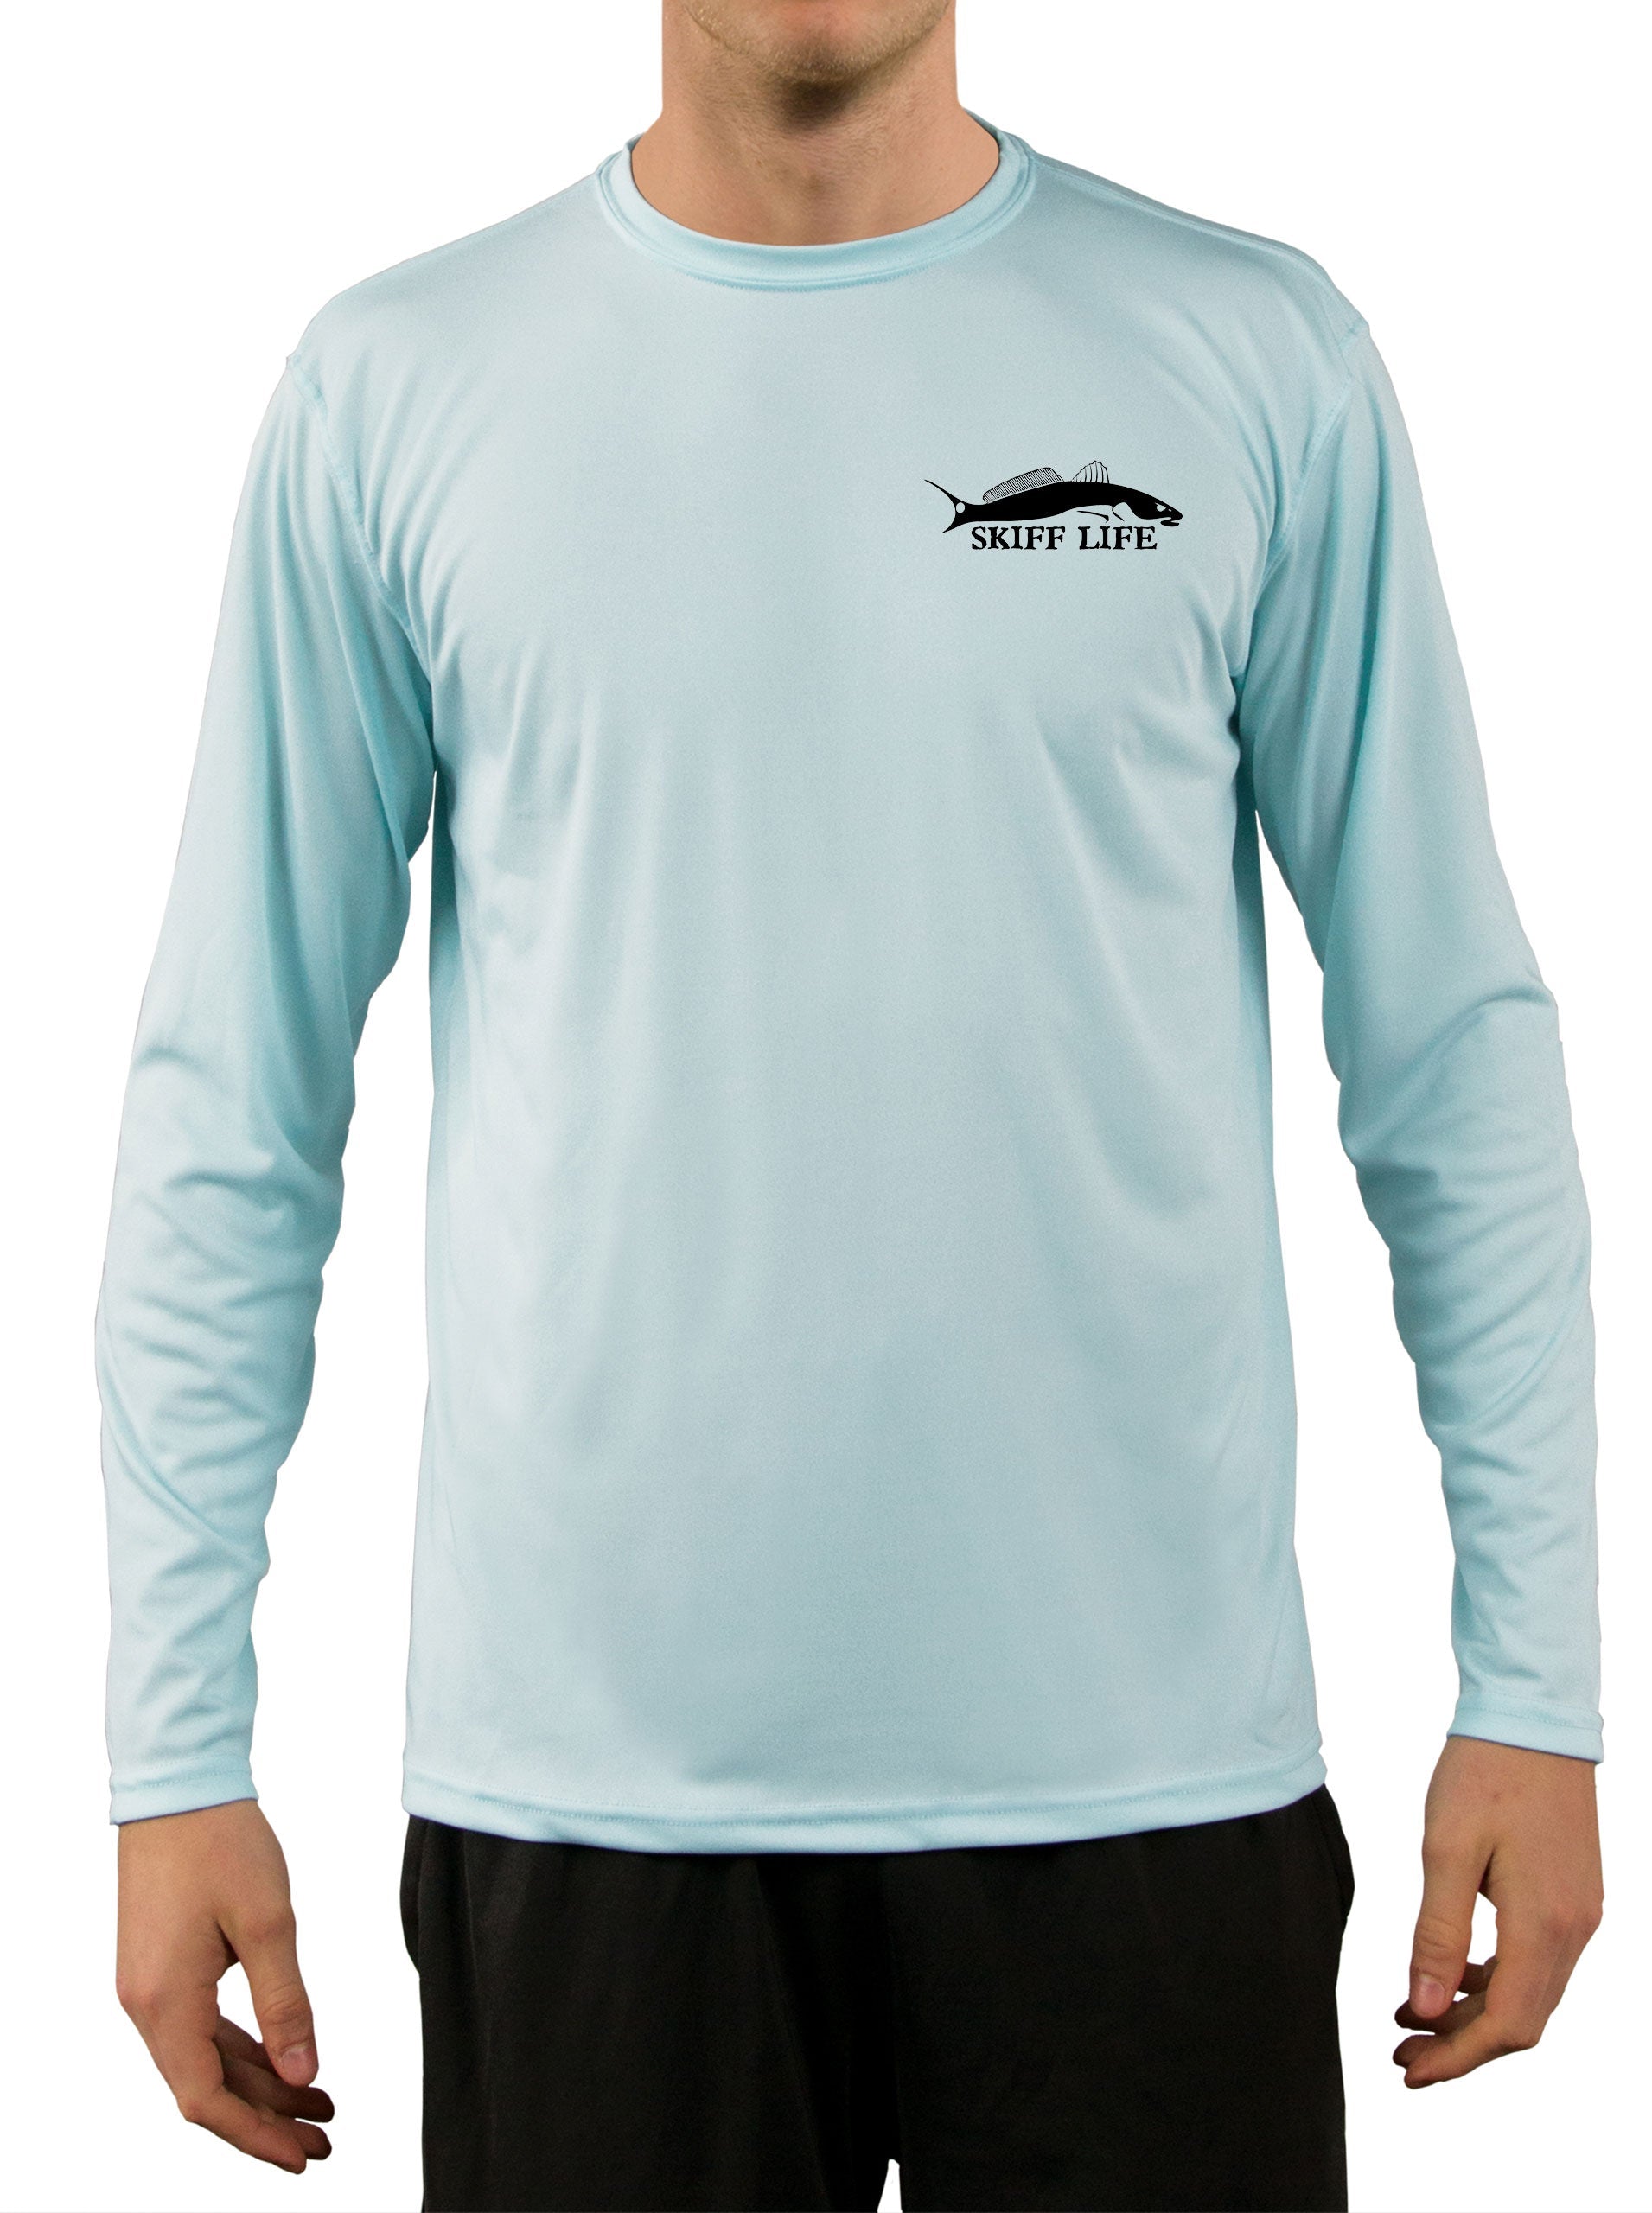 Redfish Fishing Shirts for Men Red Drum Channel Bass - UV Protected +5 –  Skiff Life